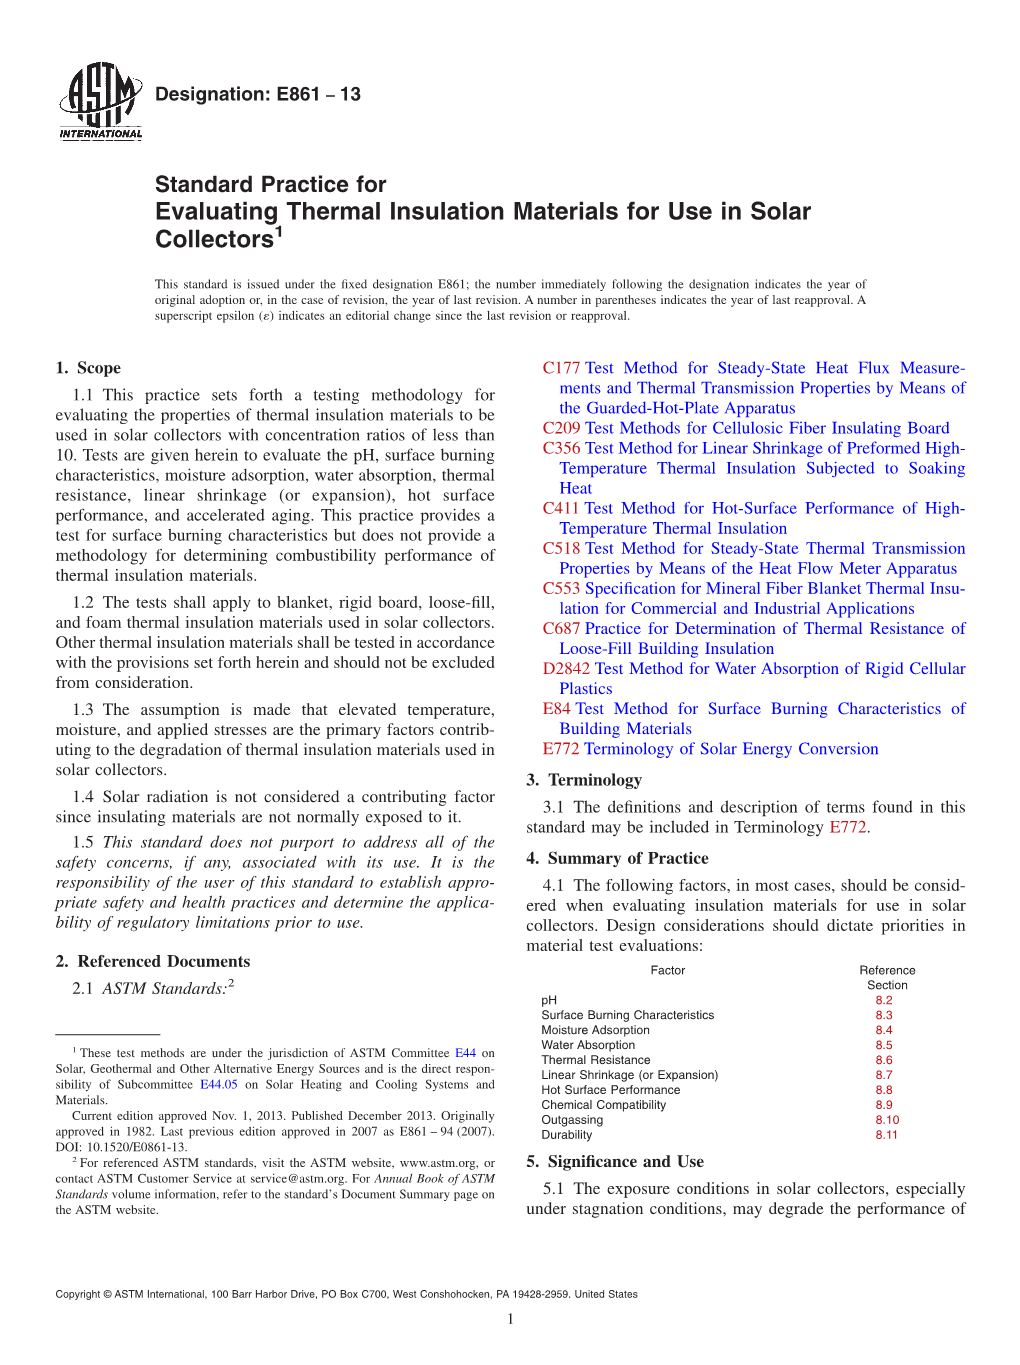 Evaluating Thermal Insulation Materials for Use in Solar Collectors1